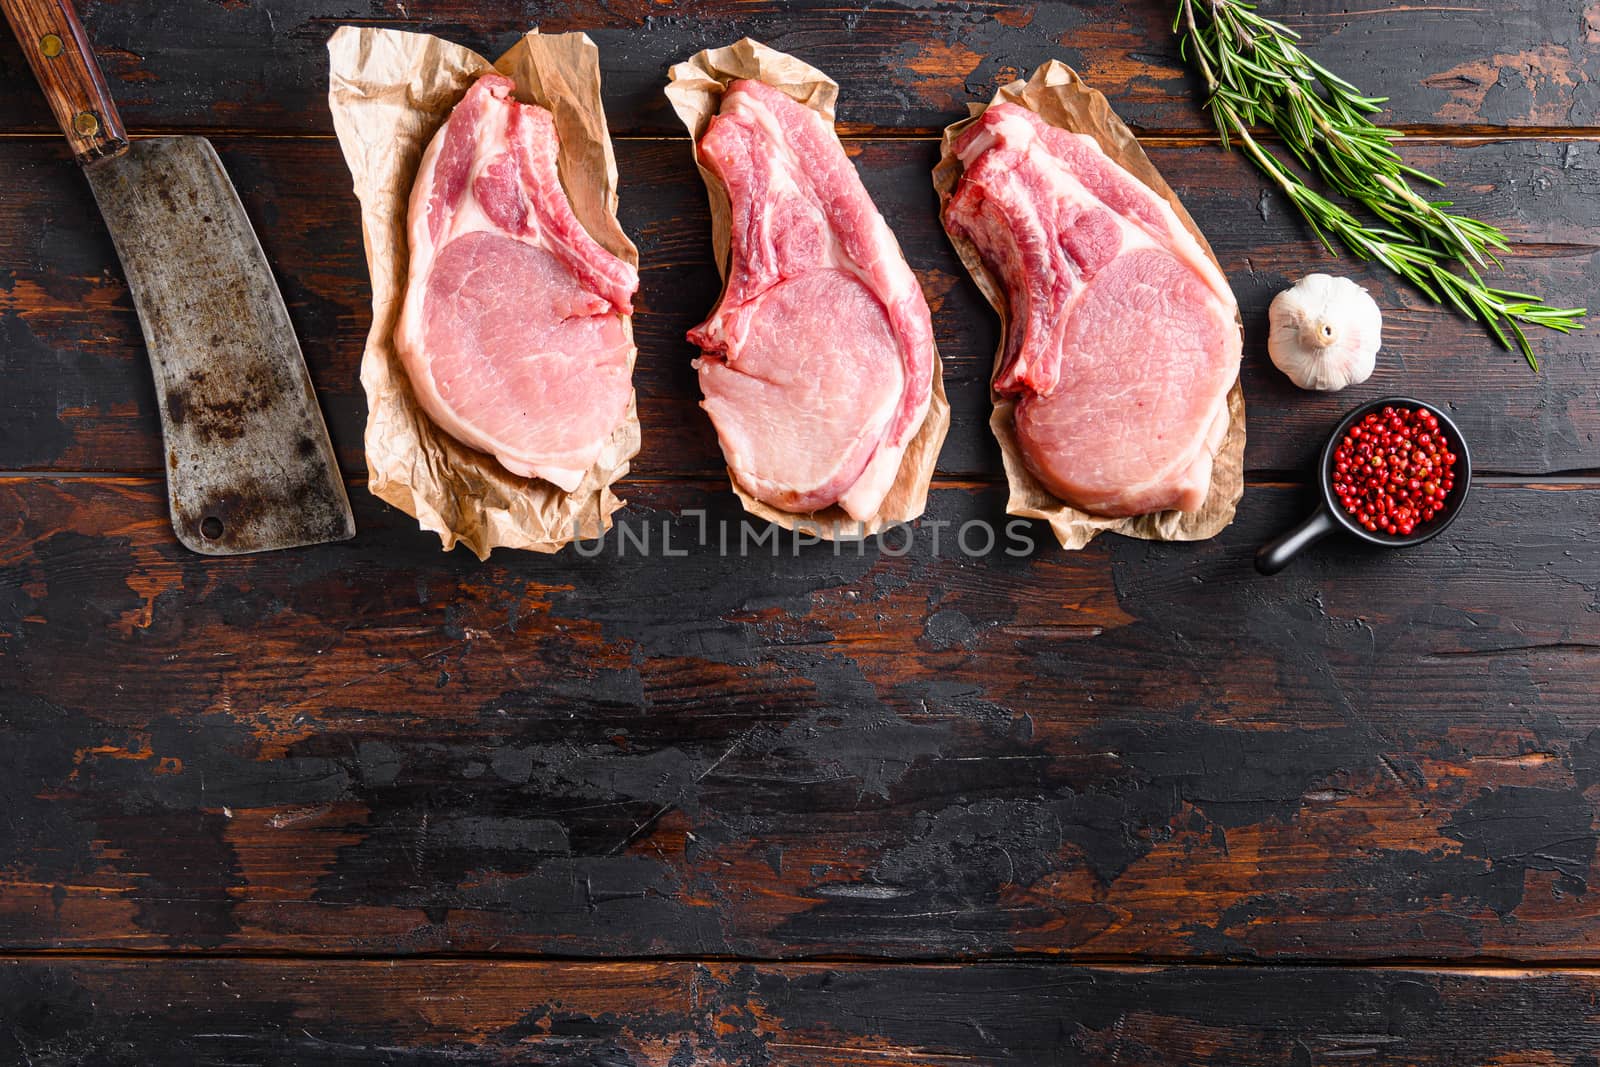 Concept organic pork meat set for grill with old american butcher knife or cleaver over old rustic dark wood table with herbs and ingrefients top view space for text. by Ilianesolenyi